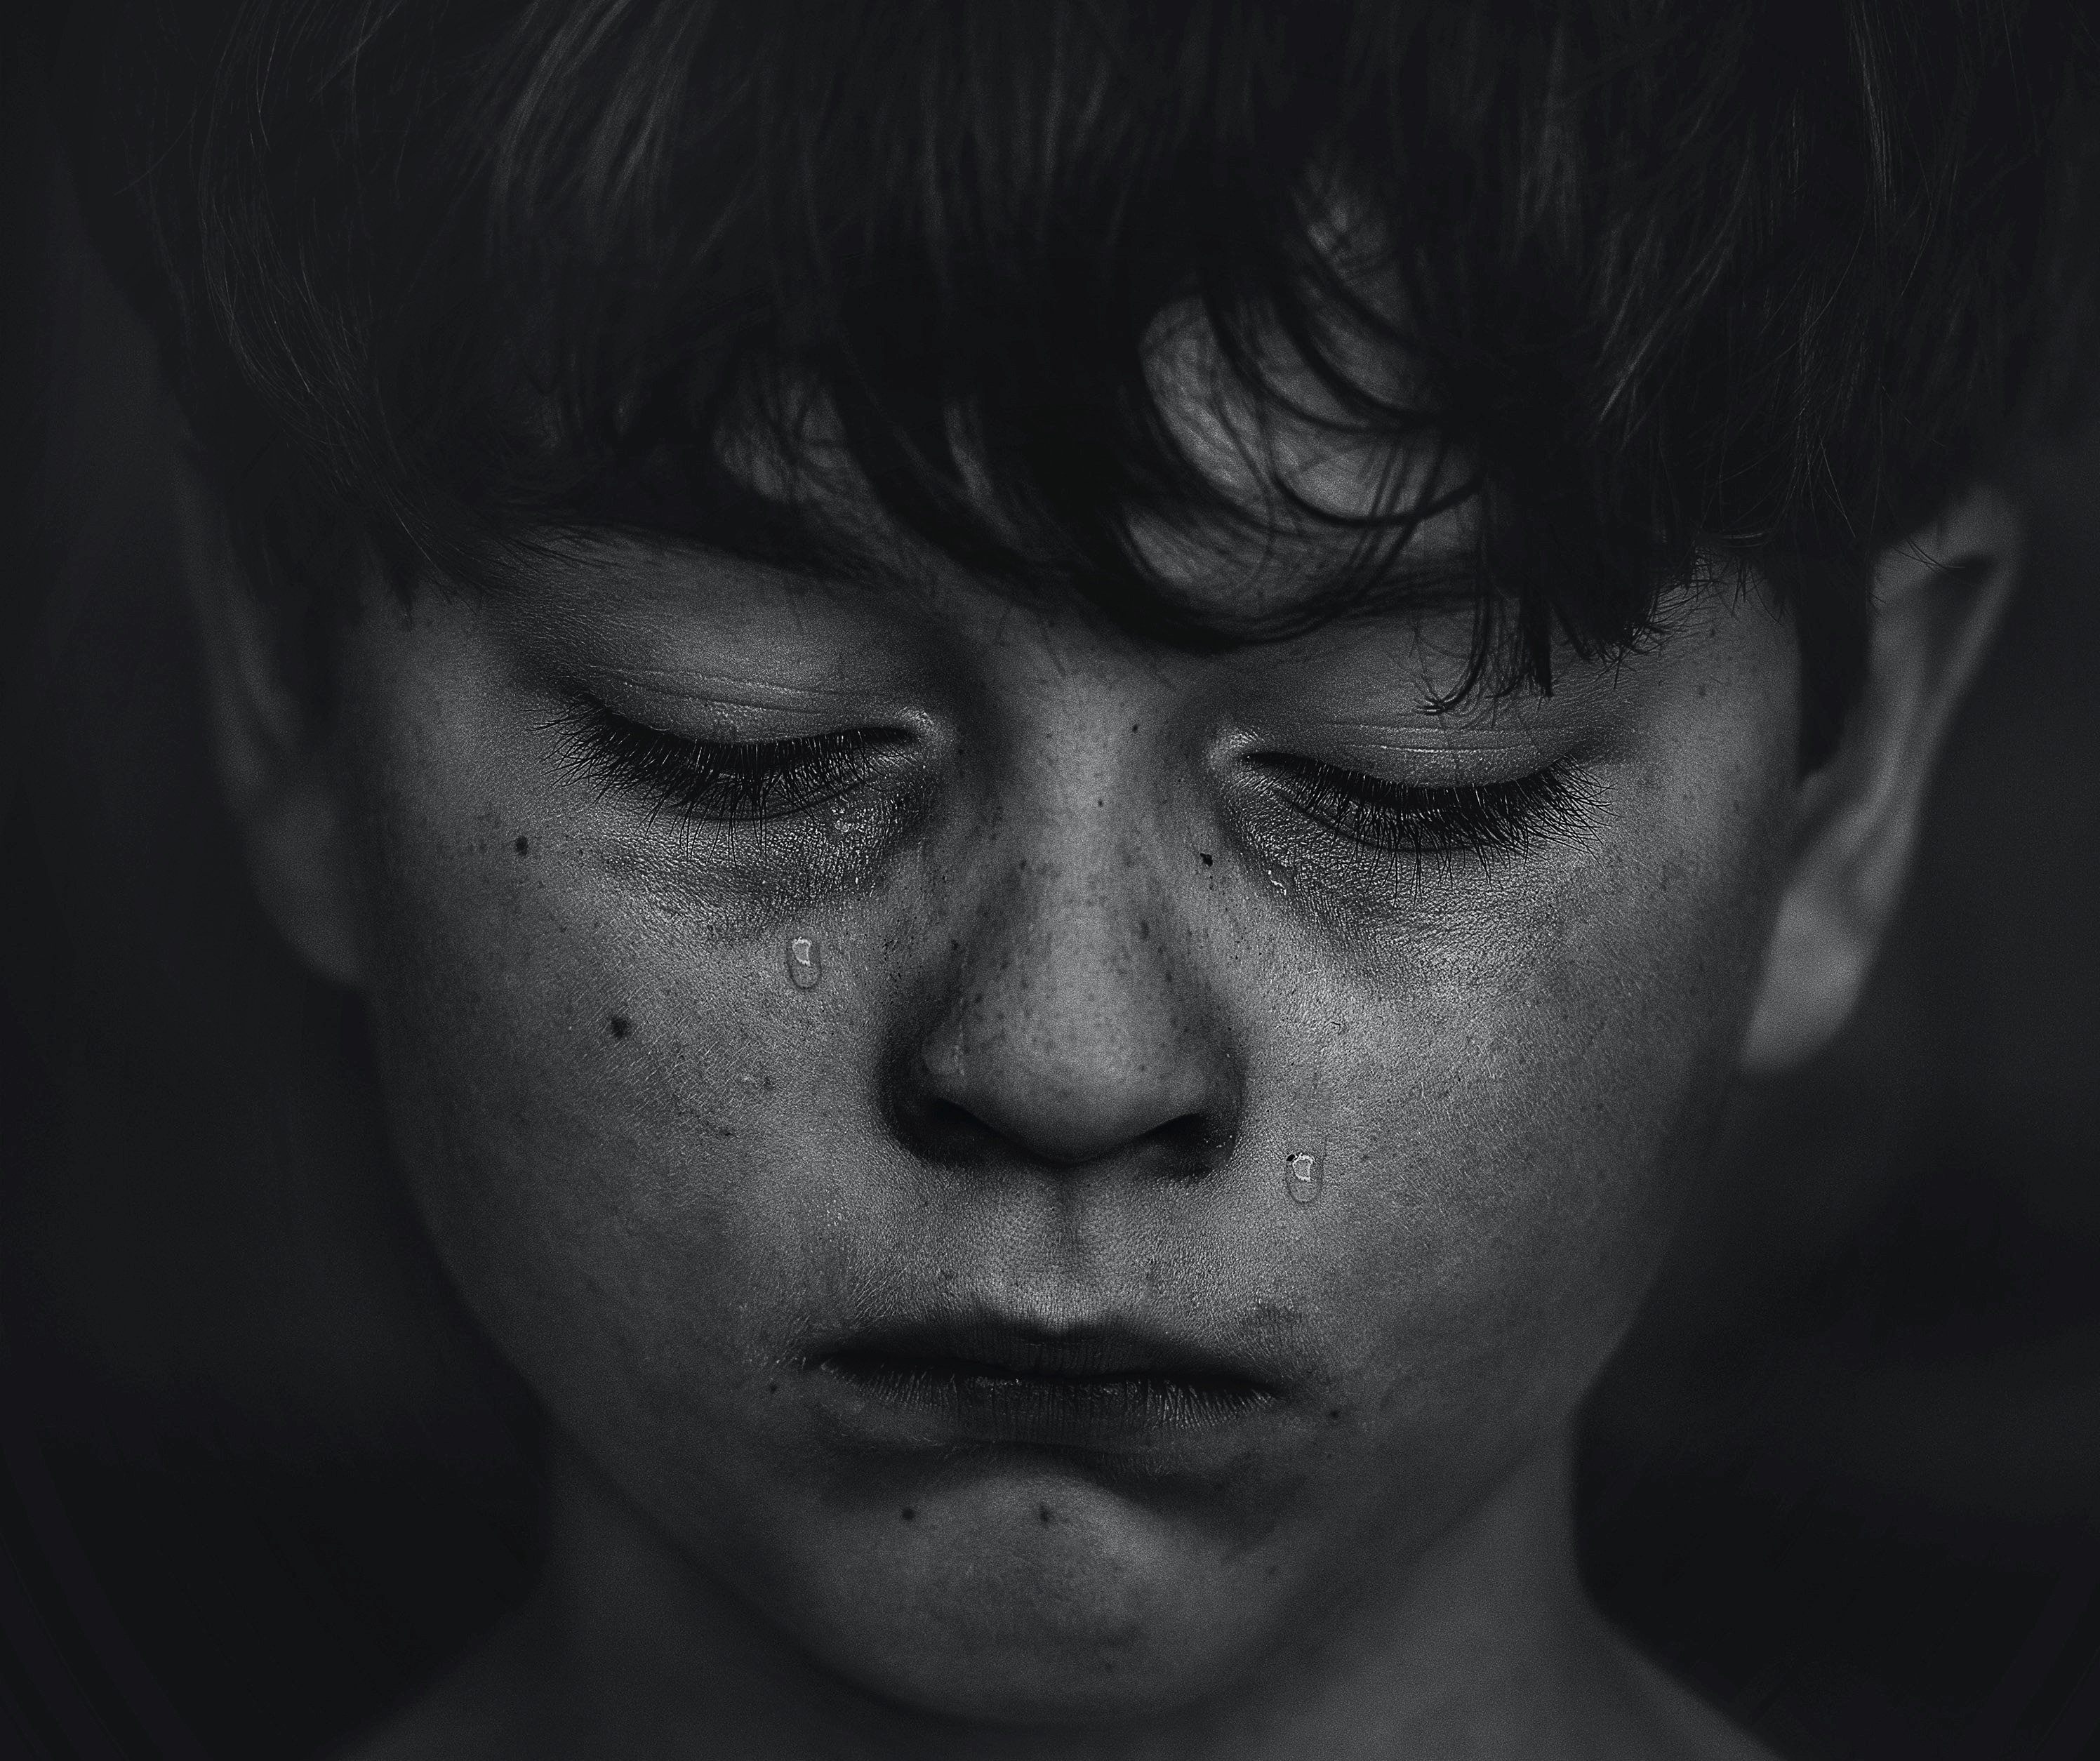 When Hazel pressed Robbie to tell the truth, he started crying. | Source: Unsplash